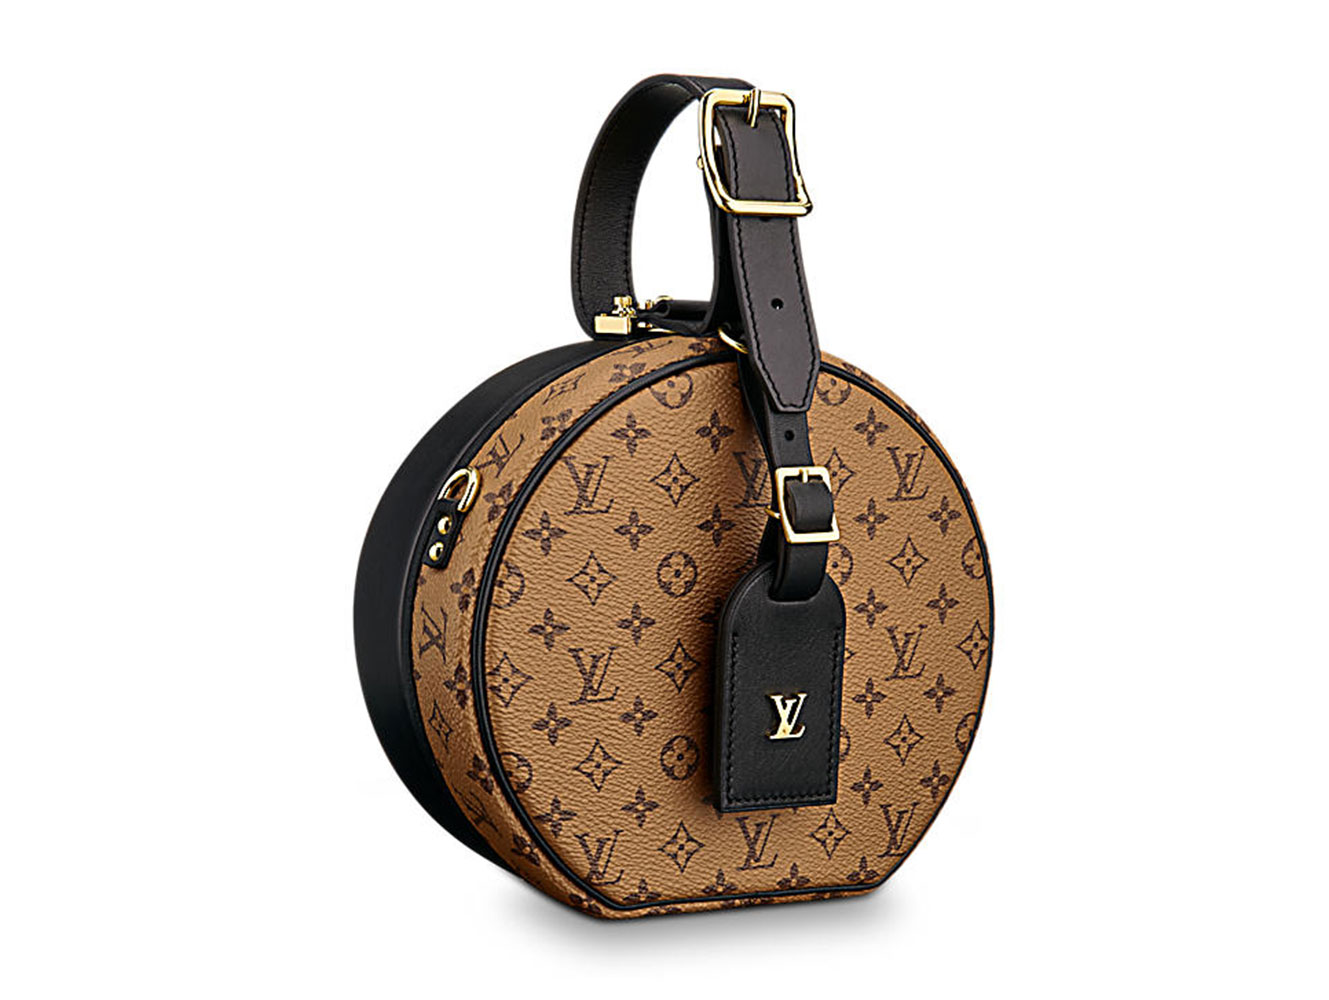 Neiman Marcus Handbags Louis Vuitton | Confederated Tribes of the Umatilla Indian Reservation